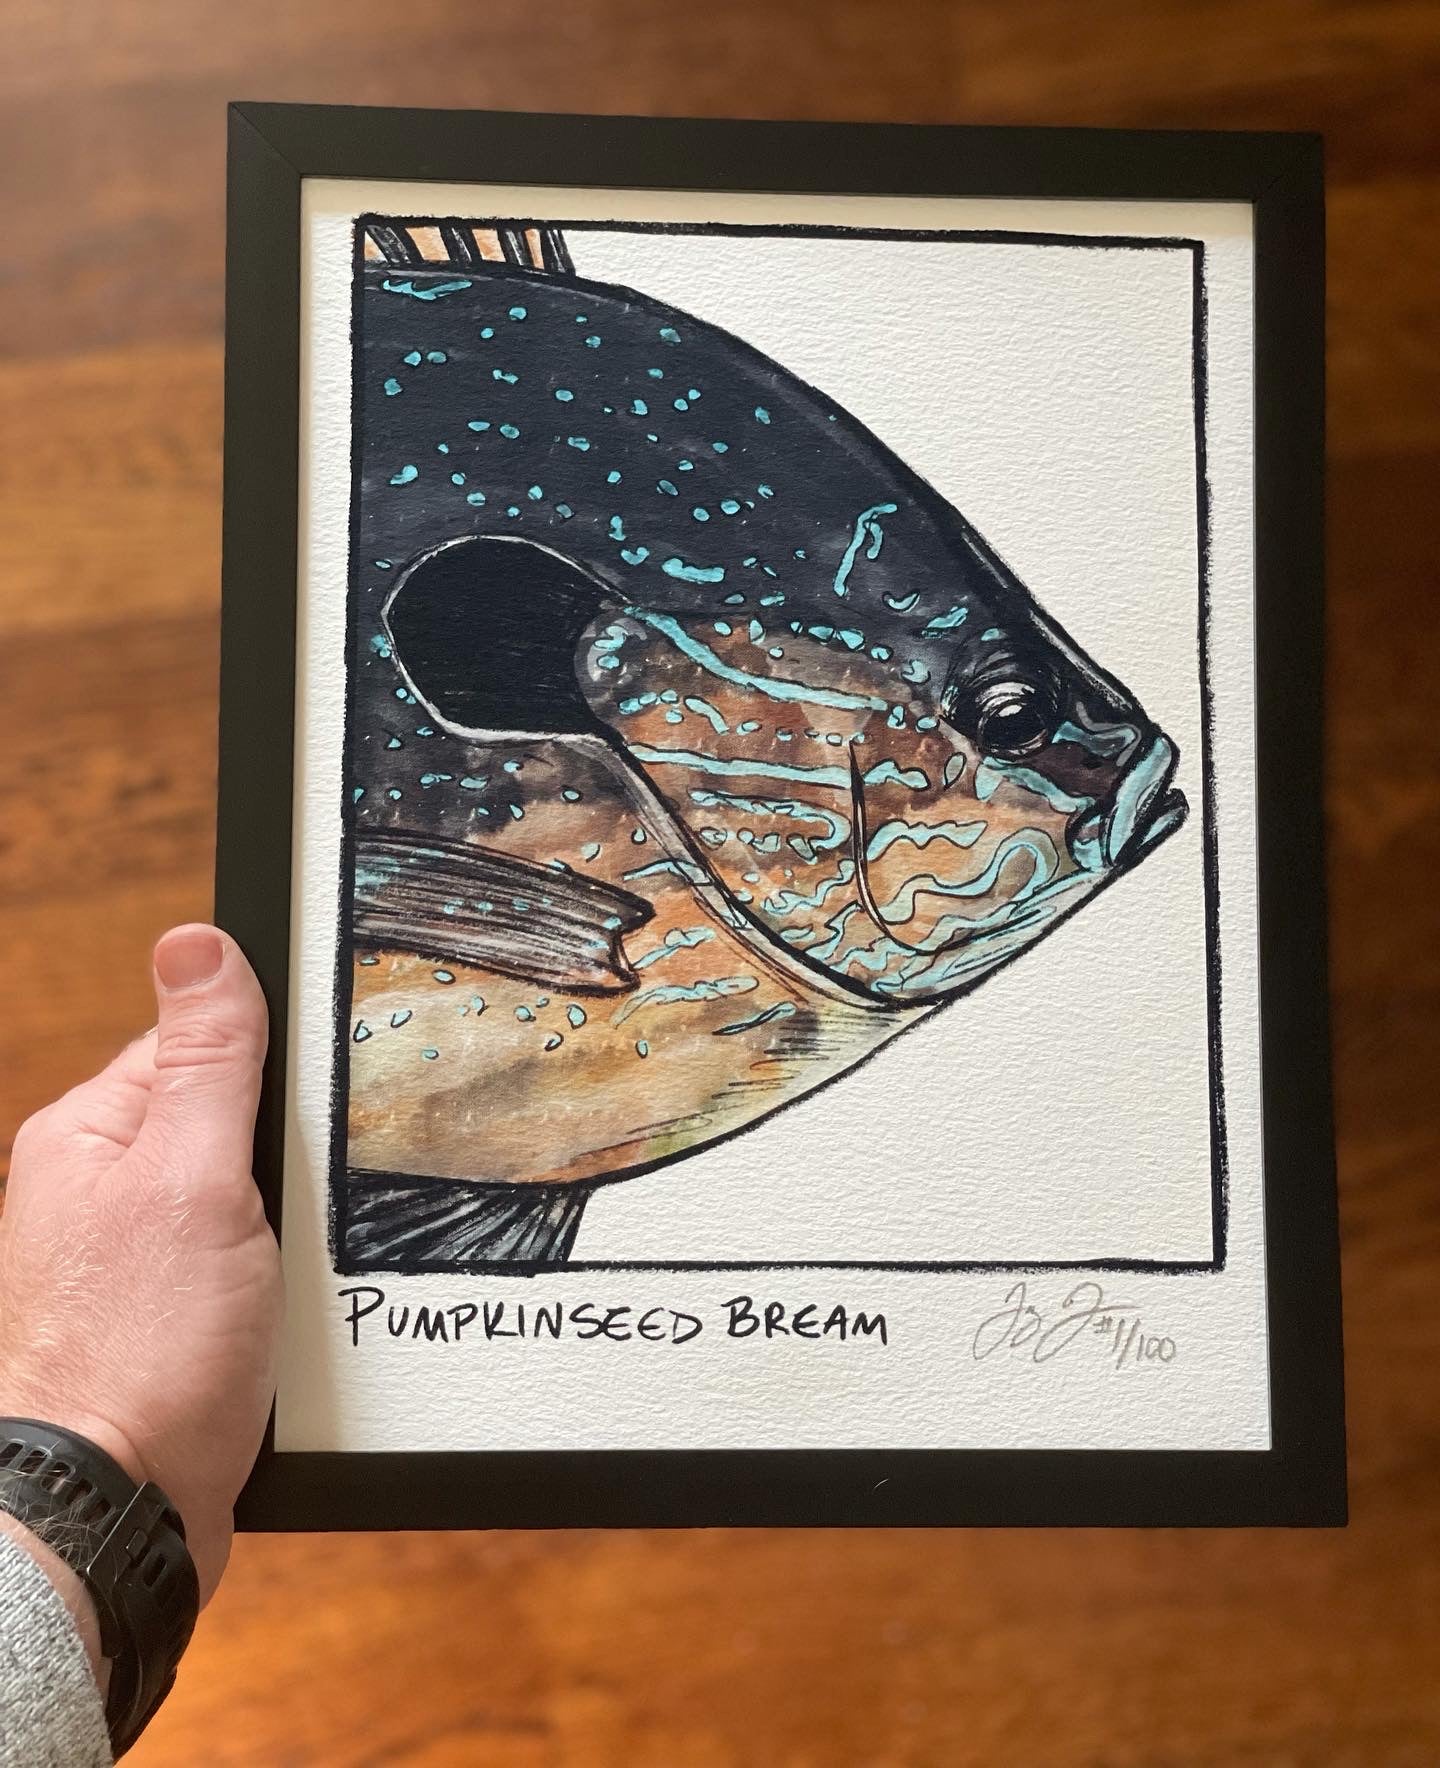 Pumpkinseed Bream Closeup Print Ed. of 100 (Frame not included)